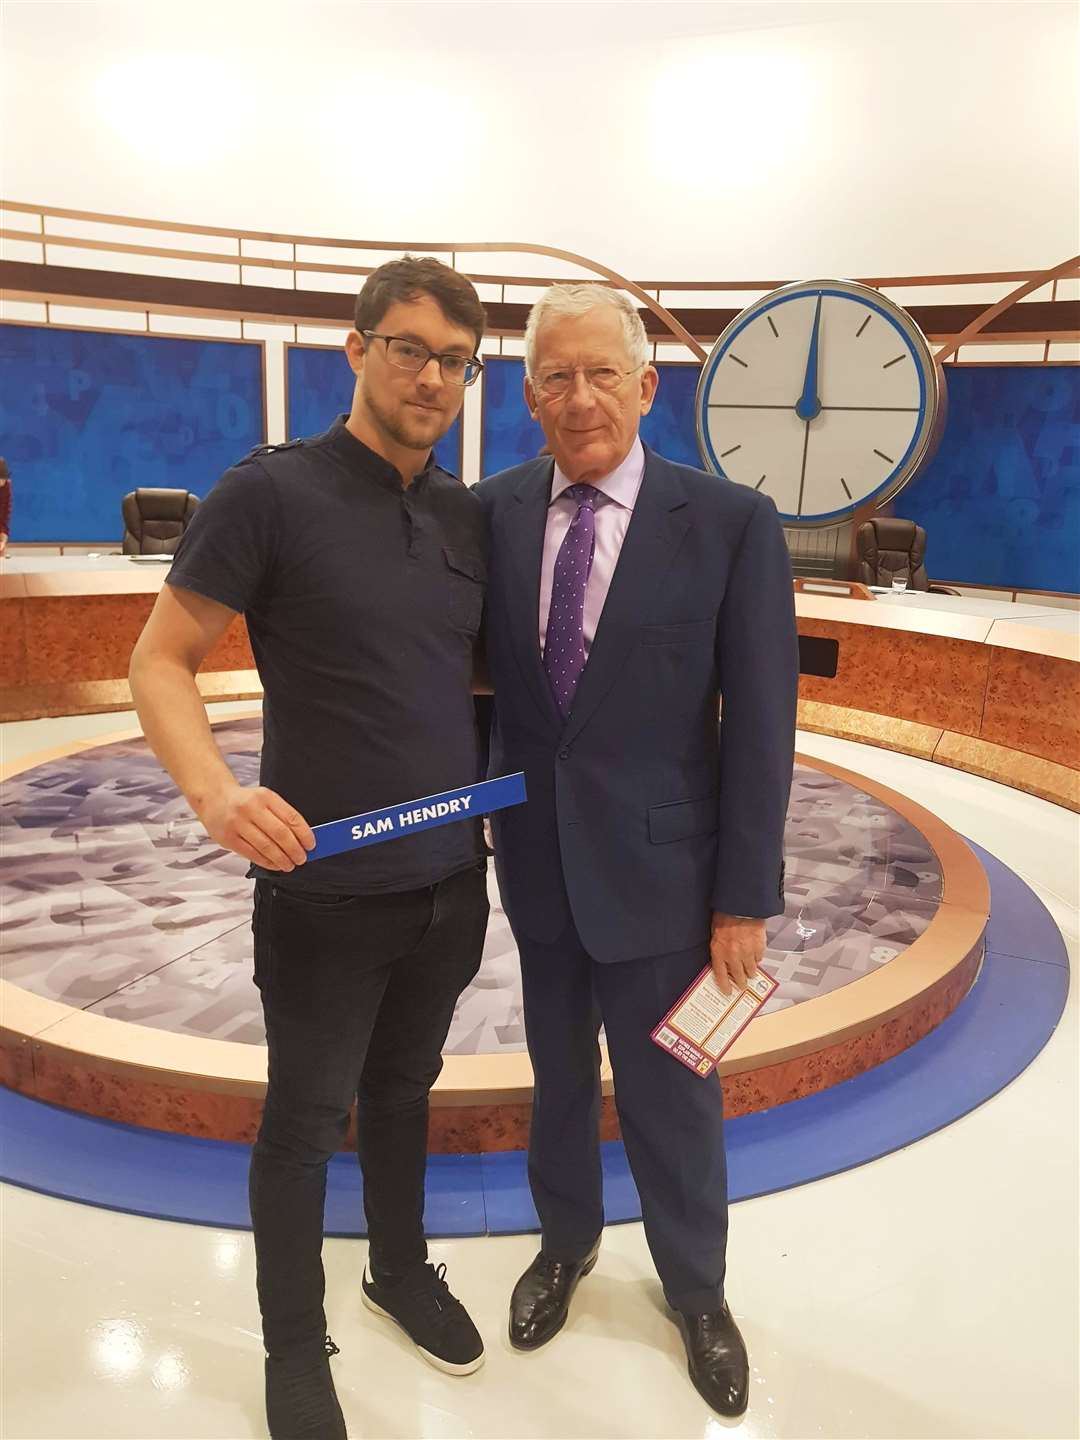 Sam Hendry with presenter Nick Hewer in the Countdown studio.